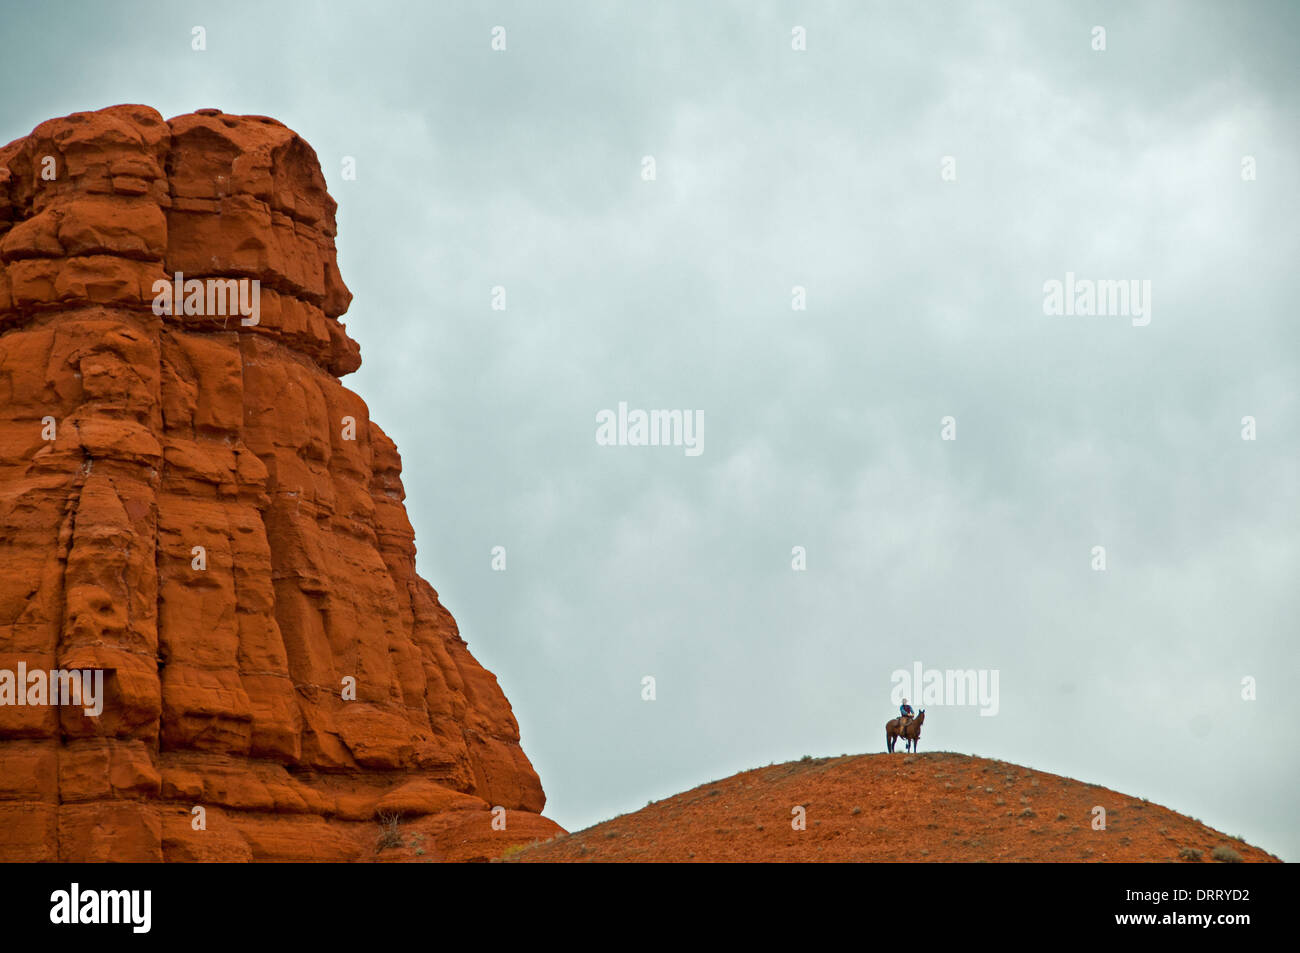 A lone cowboy on horseback stands on top of a high mound in the Chimney Rock area of the Bighorn Mountains in Wyoming Stock Photo